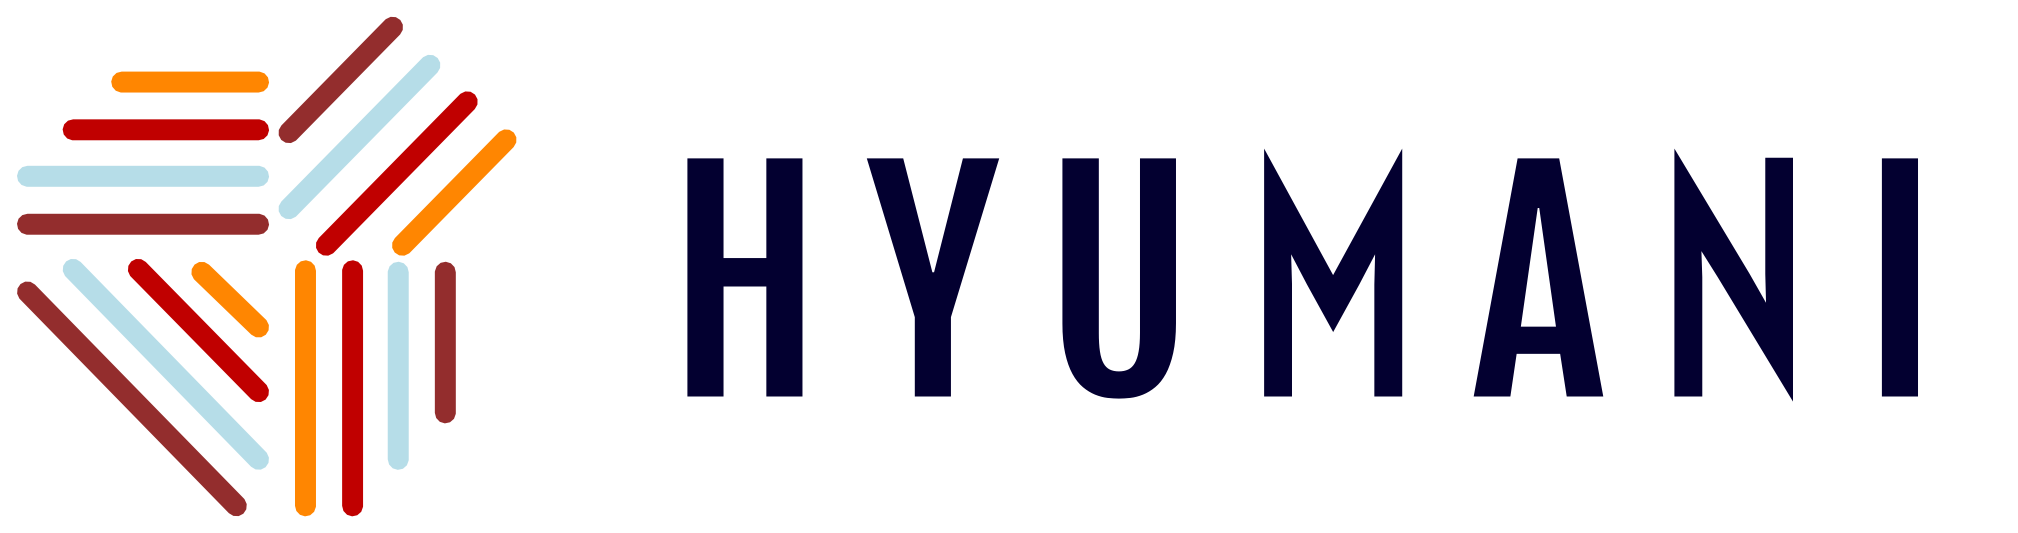 hyumani.com - solution to define 4 types of communication, supporting self worth and self respect